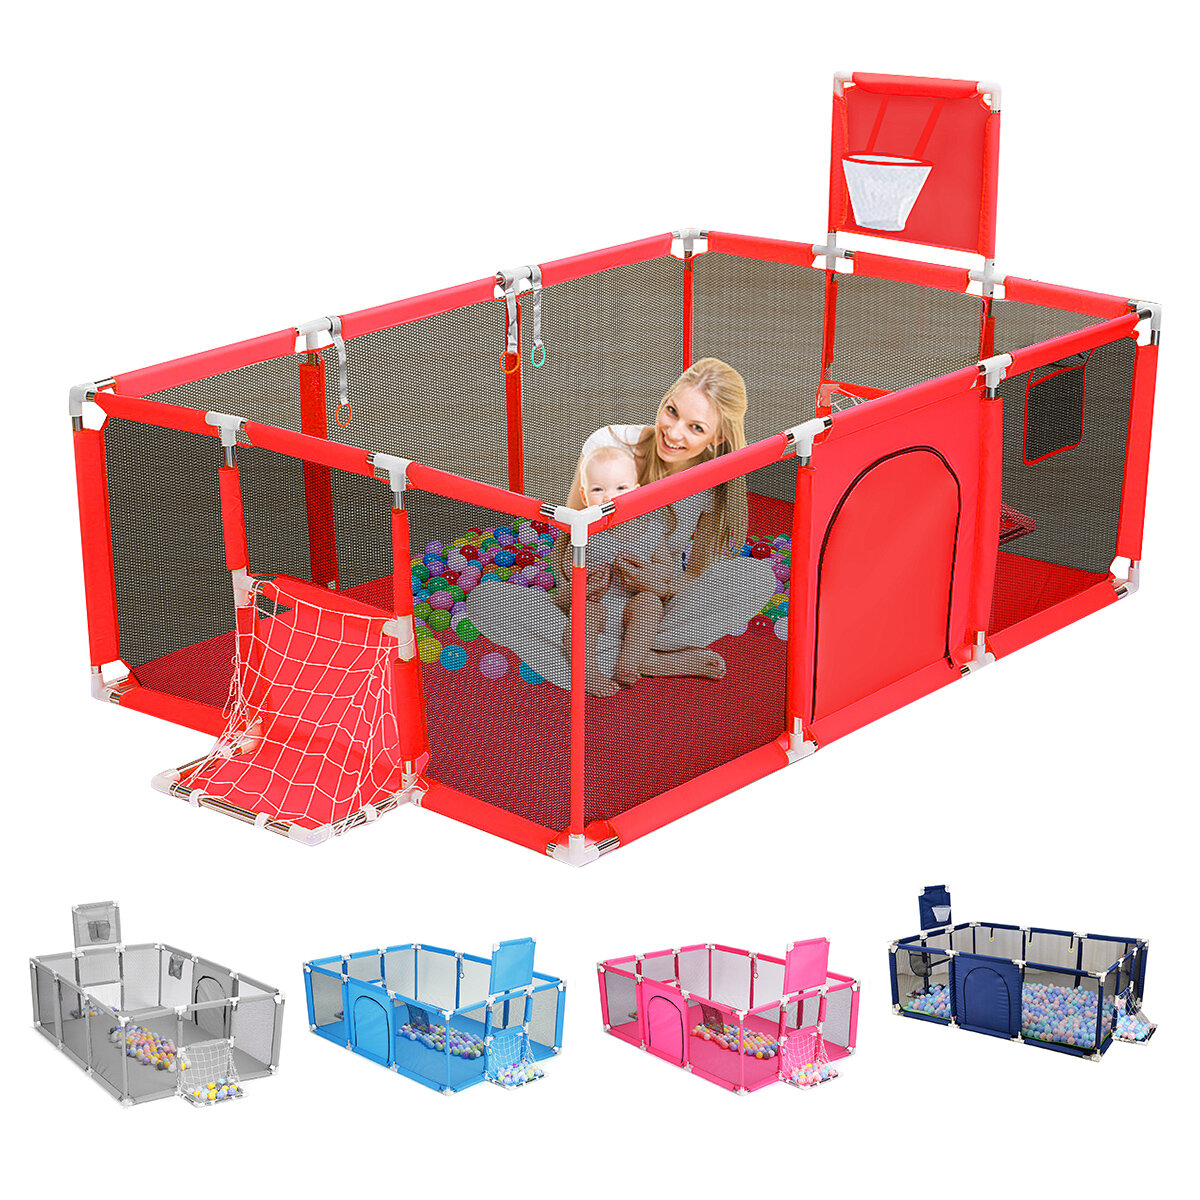 Image of 3 in 1 Baby Playpen Interactive Safety Indoor Gate Play Yards Tent Basketball Court Kids Furniture for Children Large Dr